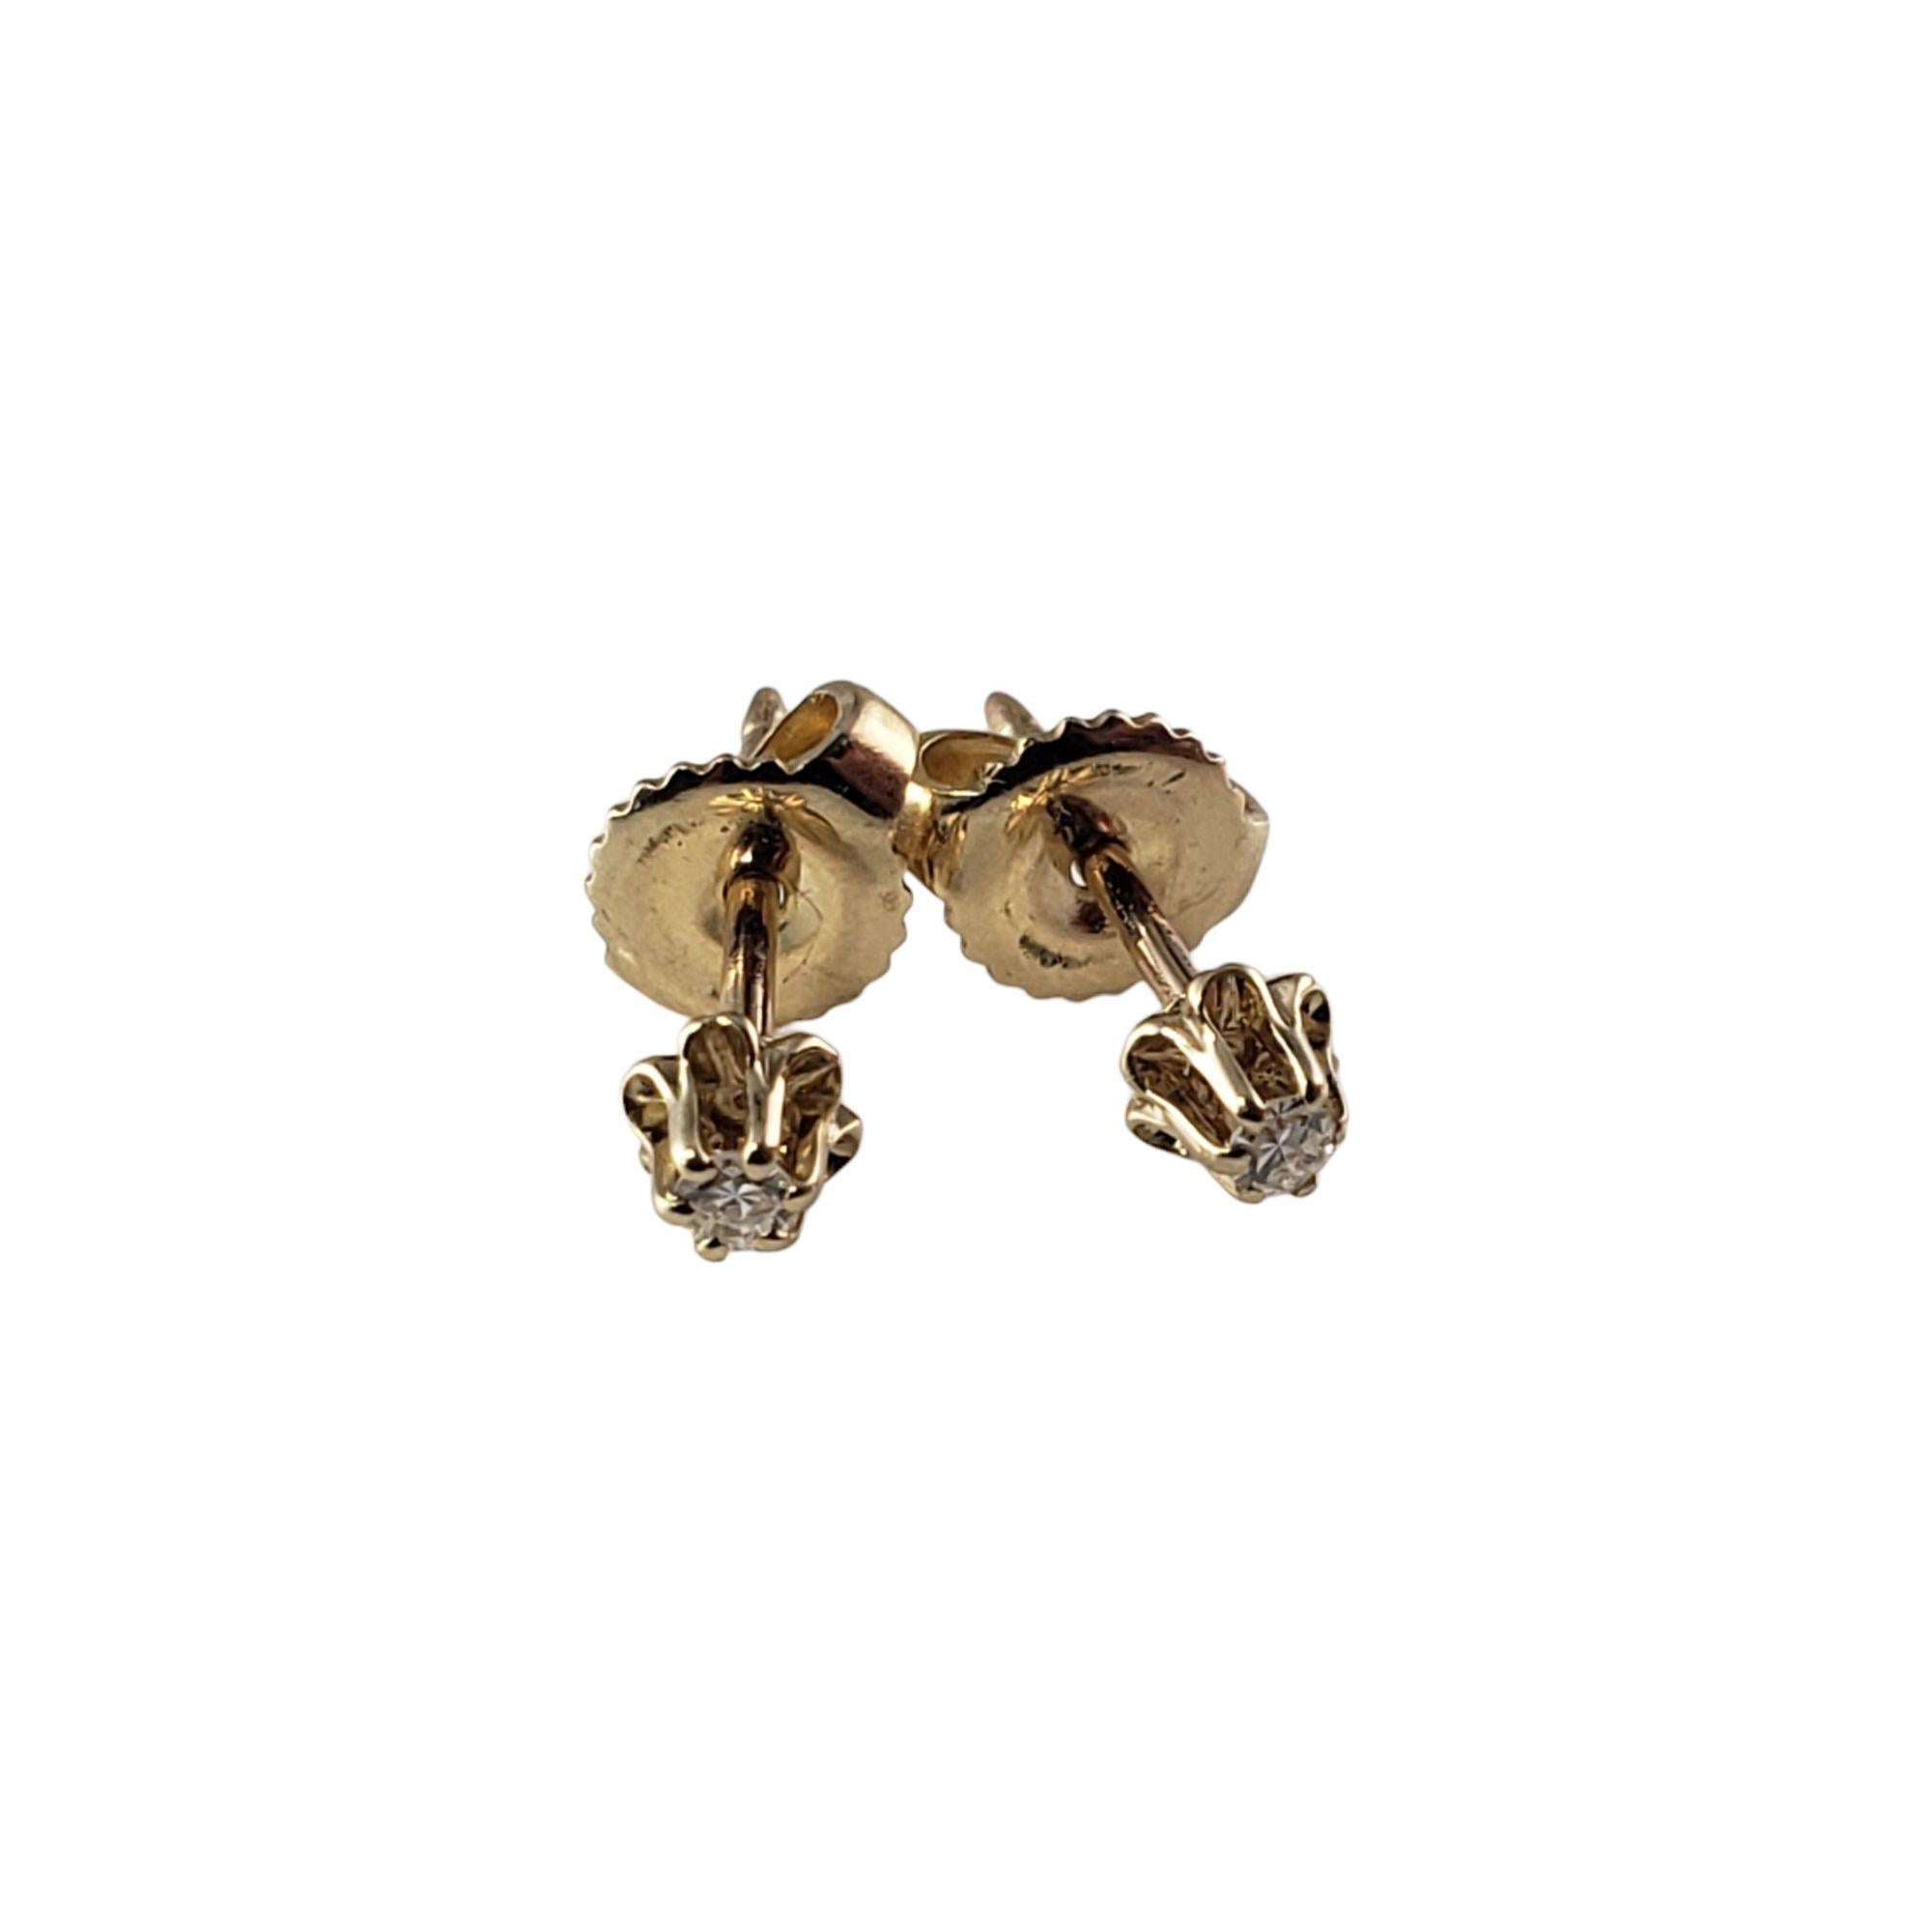 These sparkling earrings each feature one round single cut diamond set in 14K yellow gold.  Push back closures.

Approximate diamond weight: .04 ct.

Diamond color: H

Diamond clarity: VS1

Size:  3 mm

Weight:  1.0 gr./  0.6 dwt.

Tested 10K